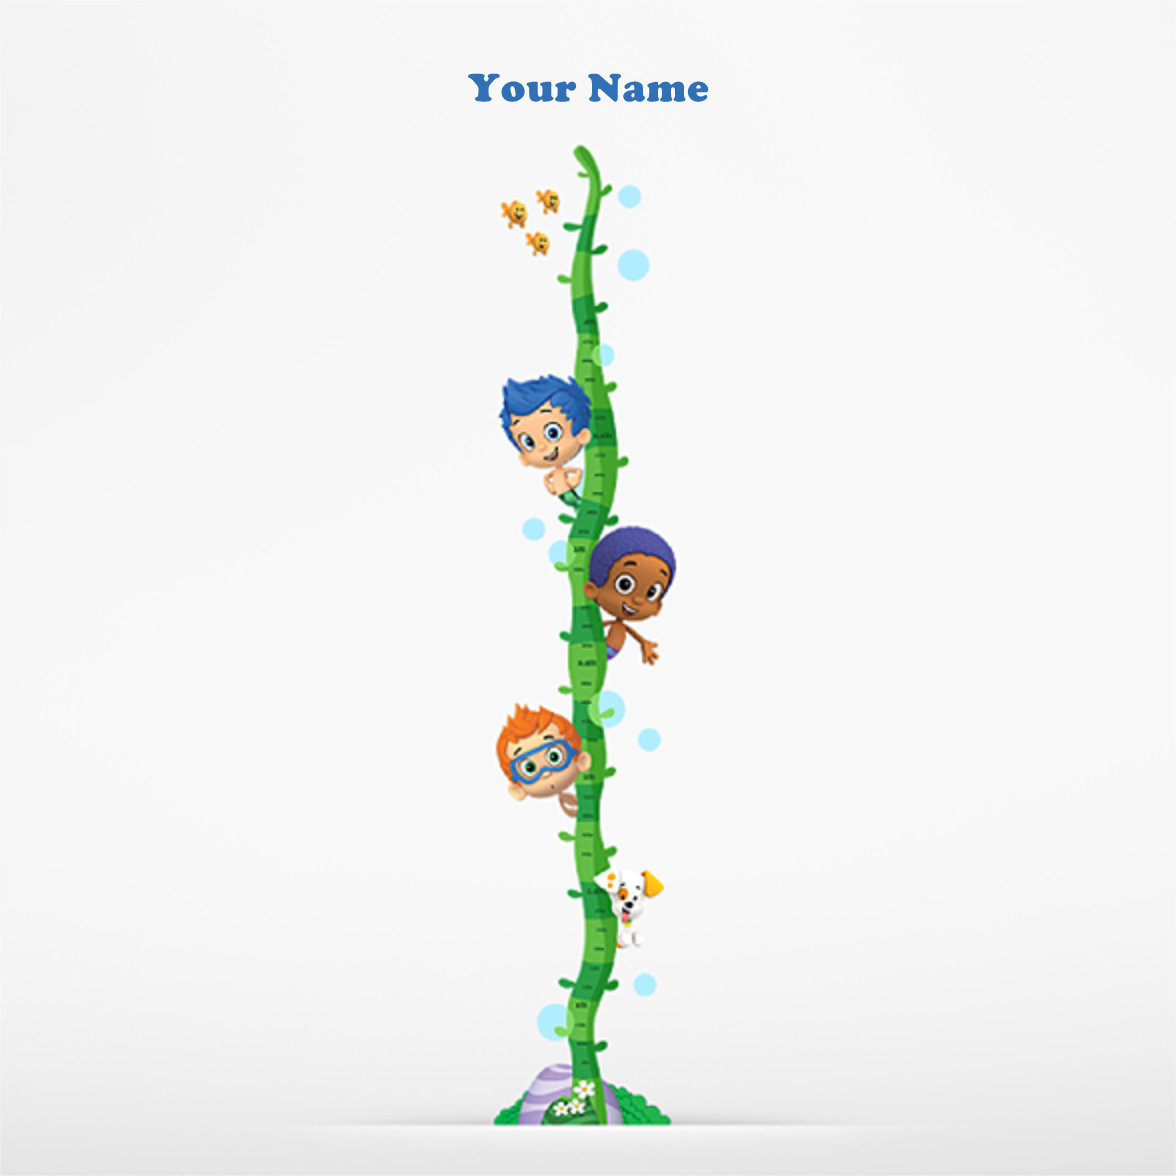 Bubble Guppies Boys Personalized Growth Chart Wall Decal for Nursery Kids Room